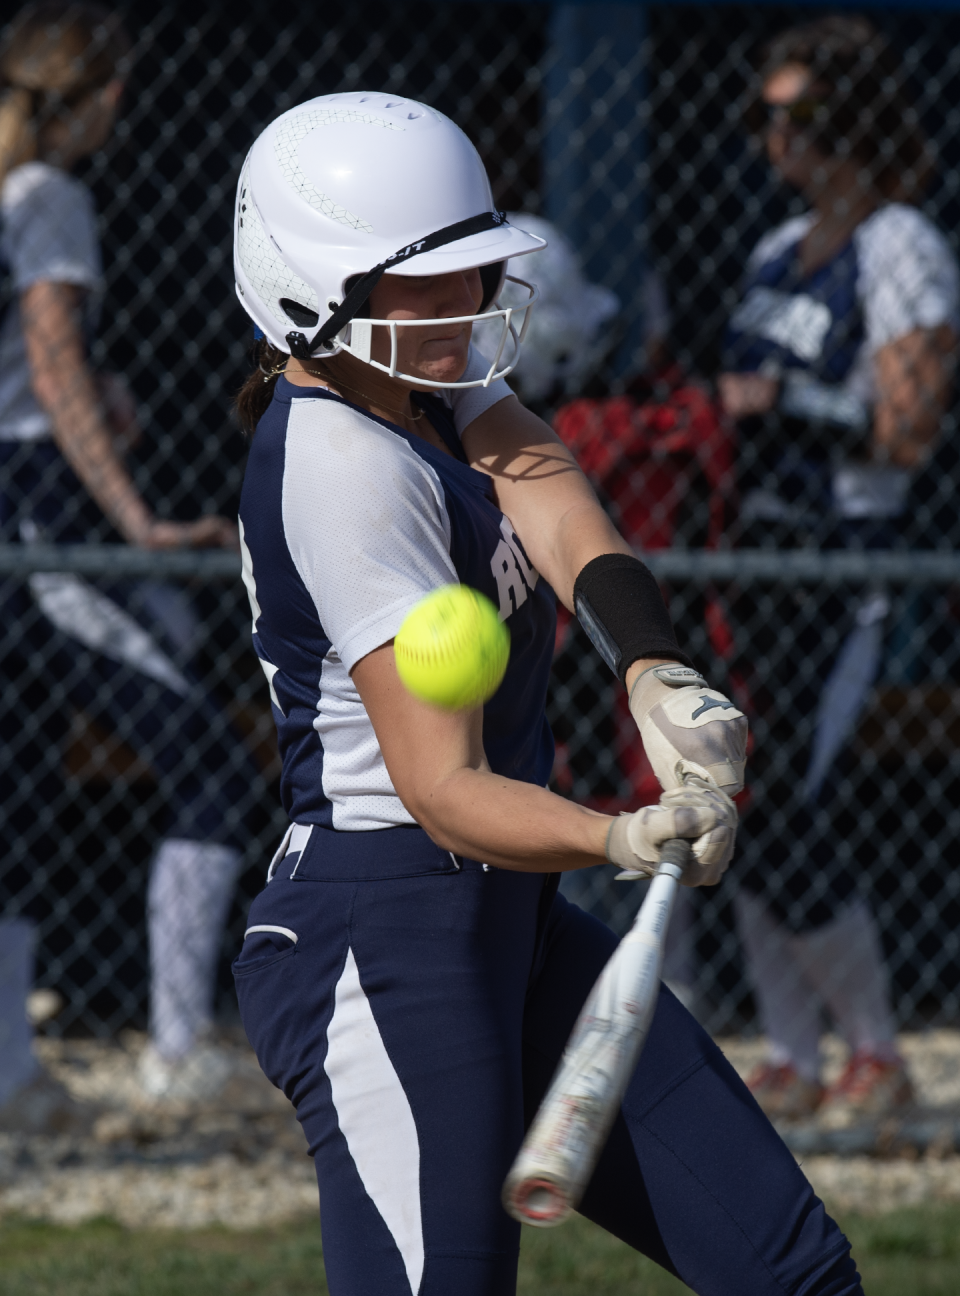 Shelbie Krieger takes a swing. Rootstown hosted Mogadore for softball on Tuesday, April 11.